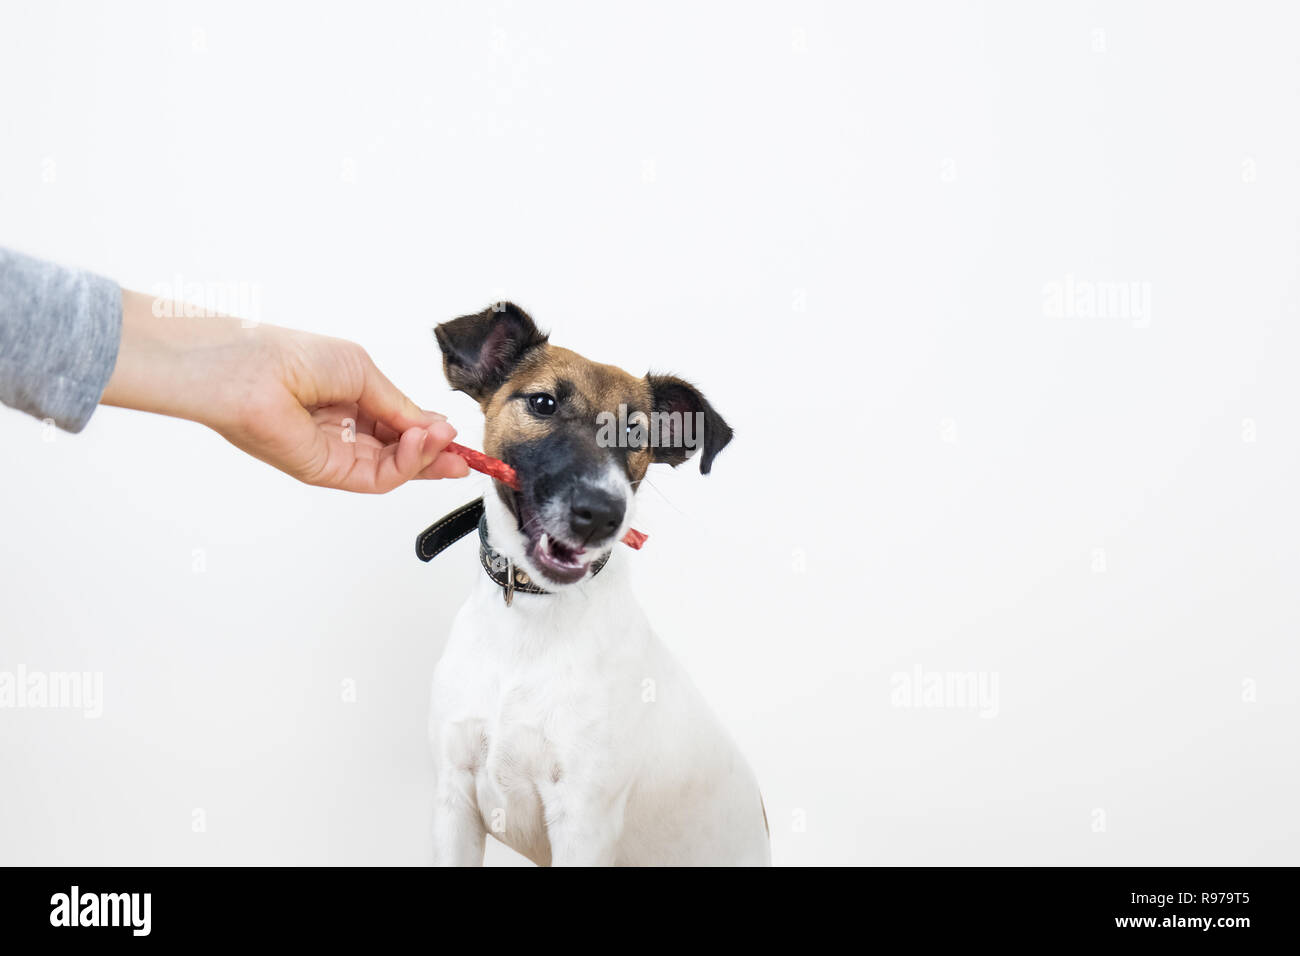 Fox terrier puppy takes a treat from human, isolated background. Little purebred dog  given a piece of food by a female hand Stock Photo